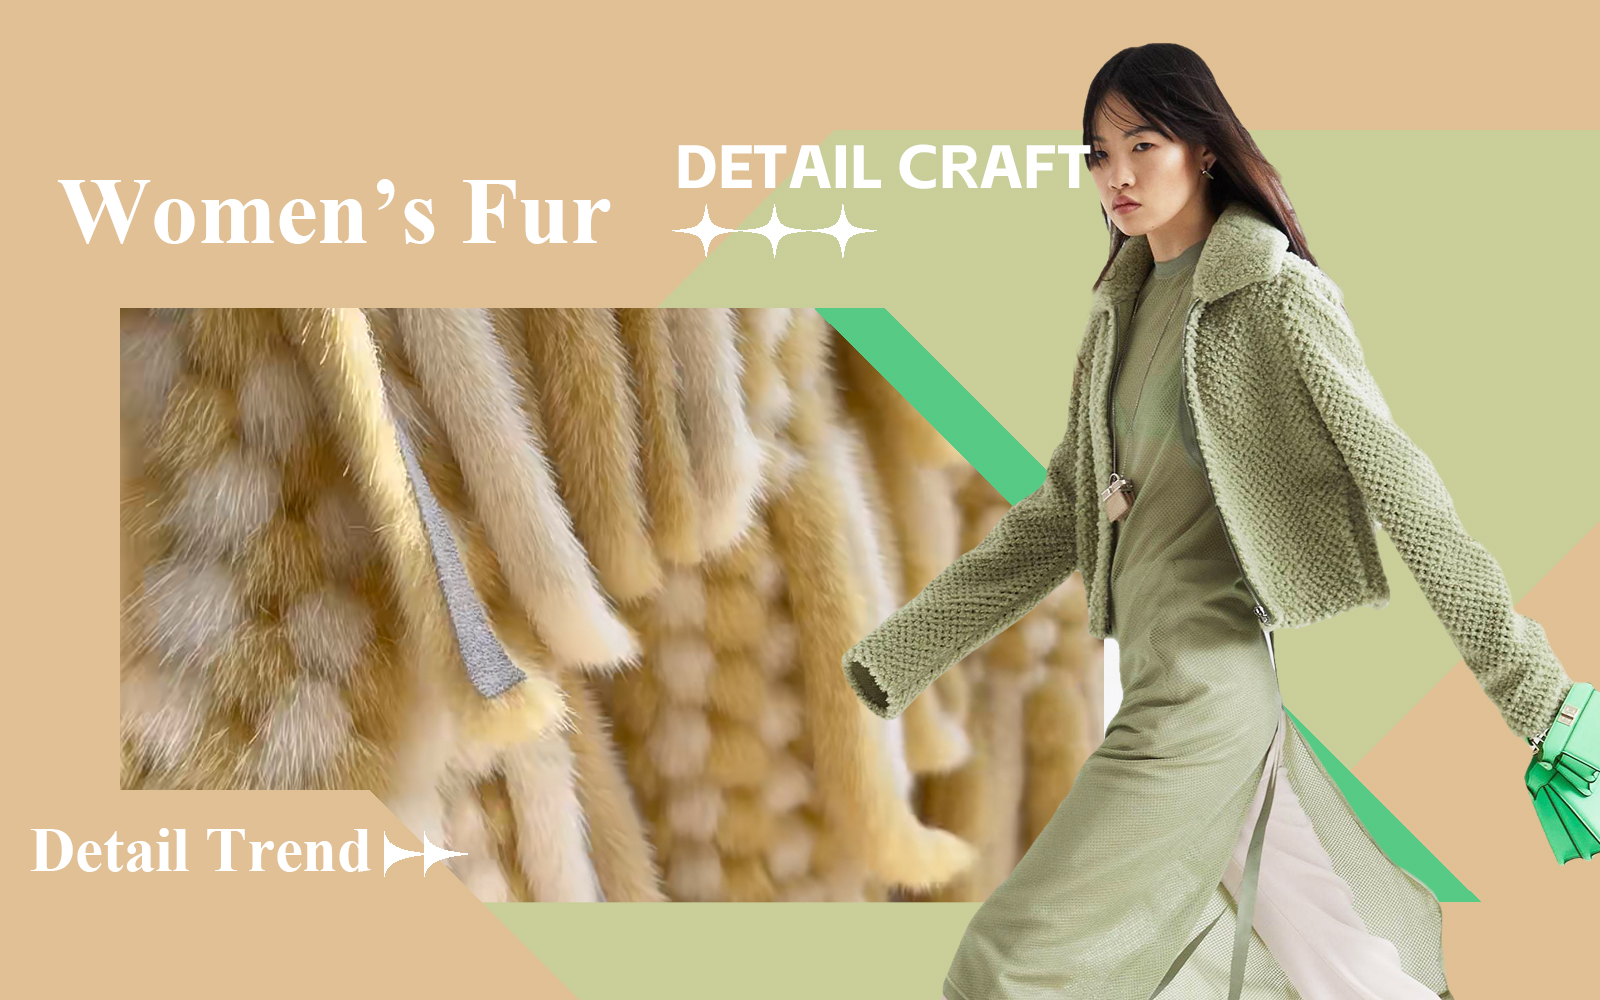 Texture Weaving -- The Detail & Craft Trend for Women's Fur